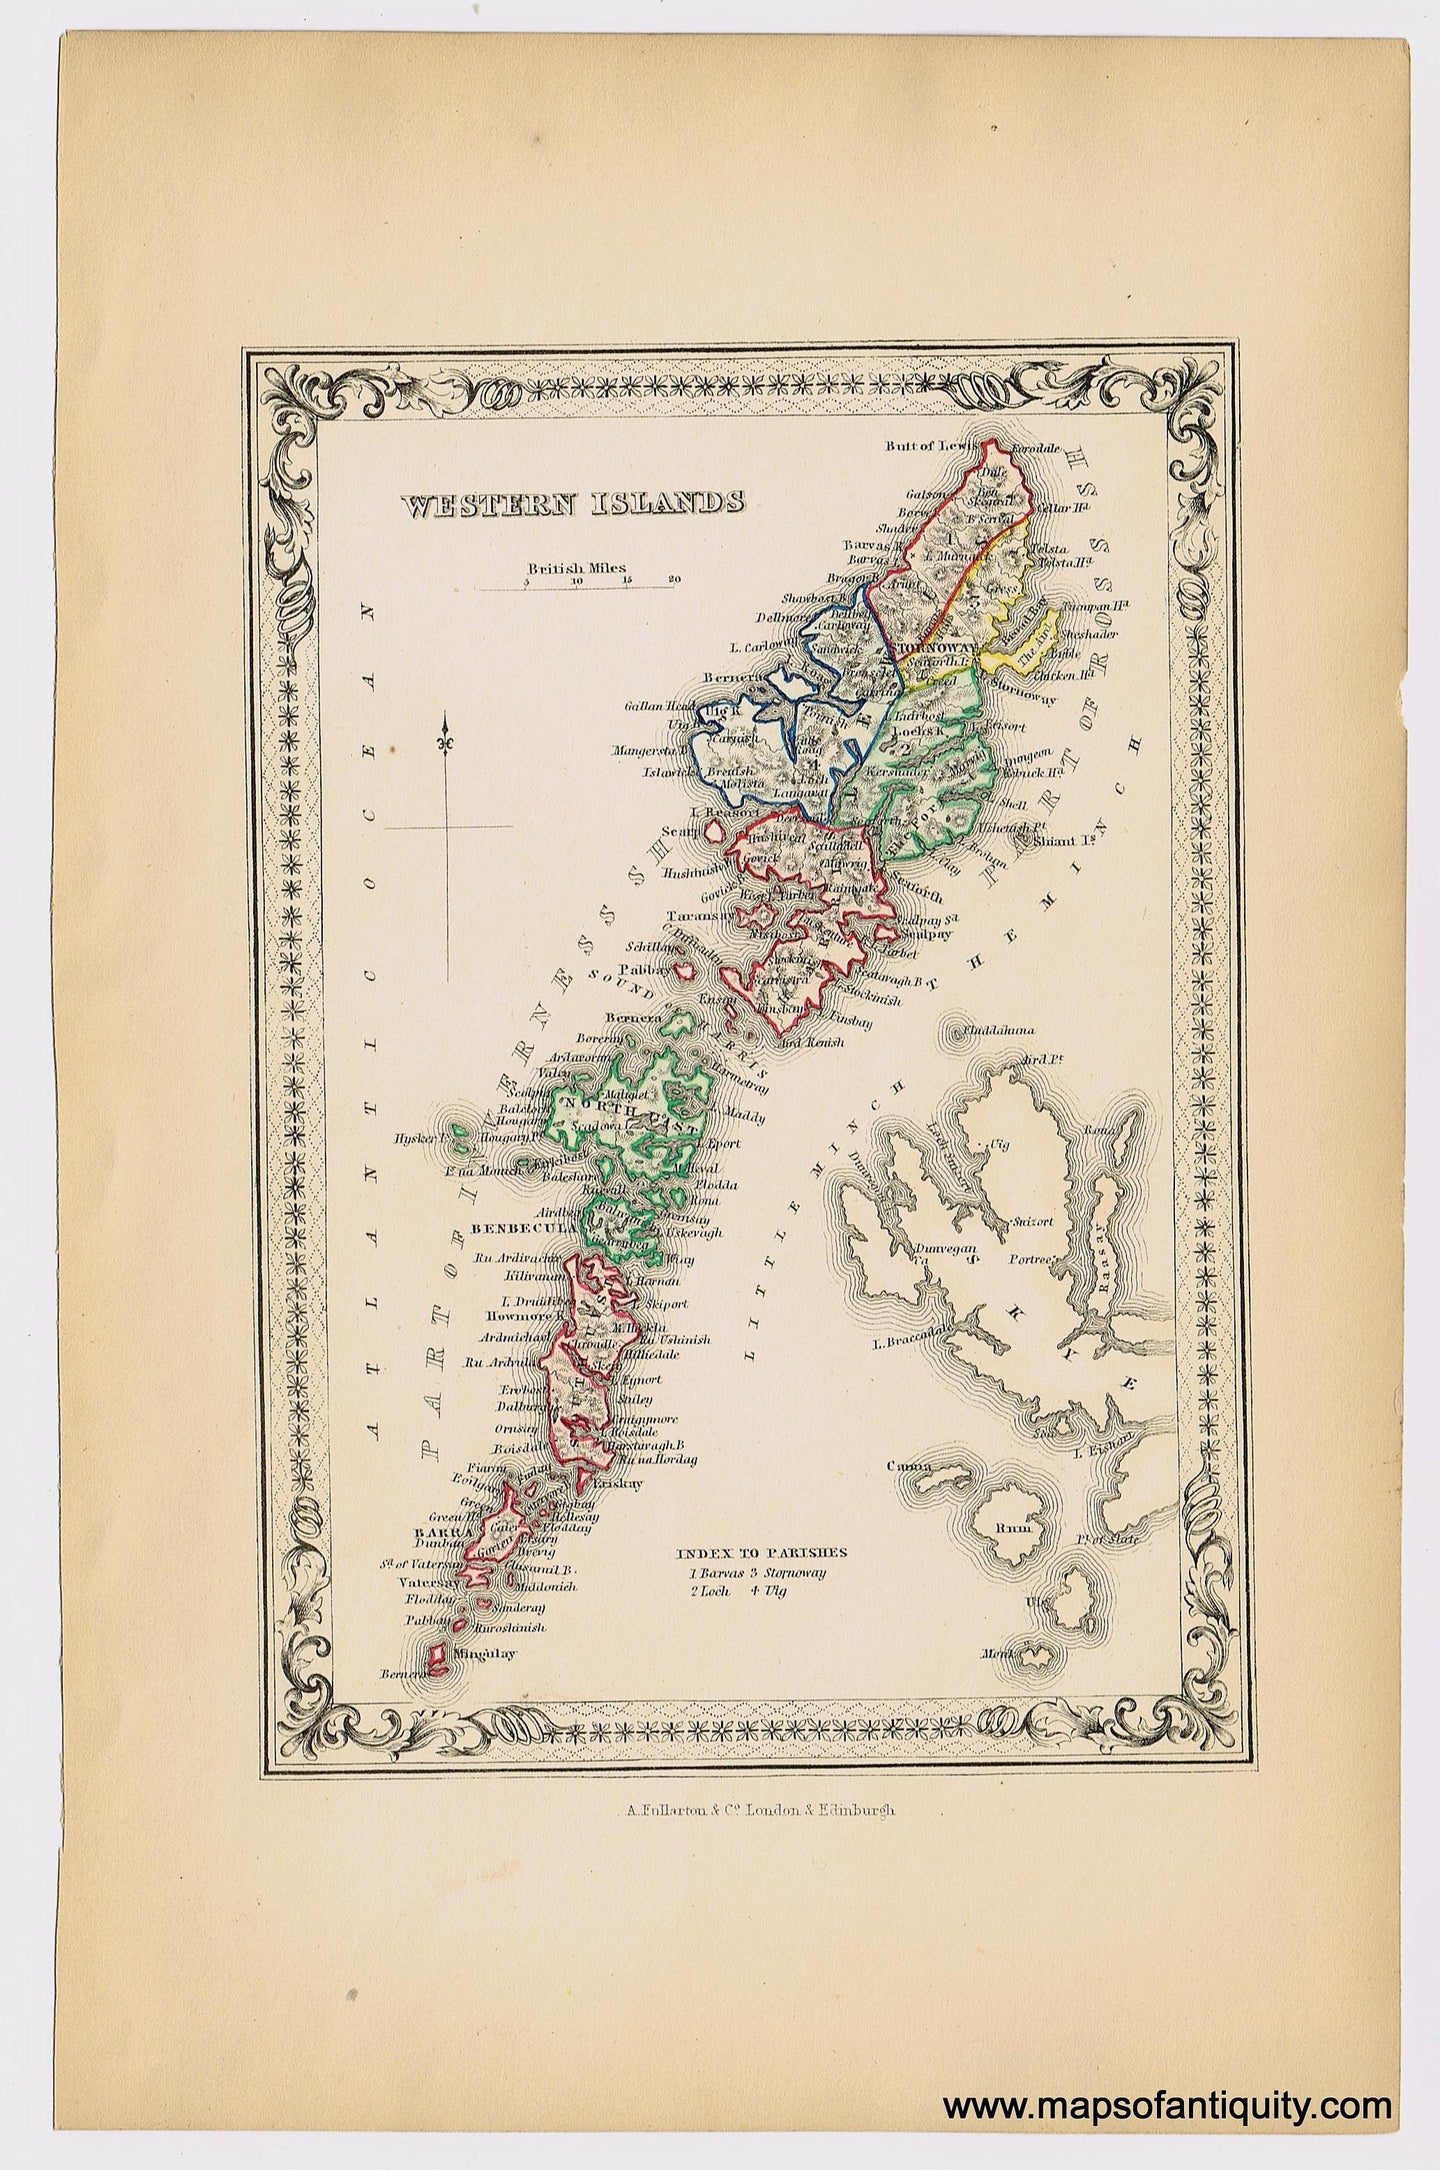 Genuine-Antique-Hand-colored-Map-Western-Islands-1855-A-Fullarton-Co--Maps-Of-Antiquity